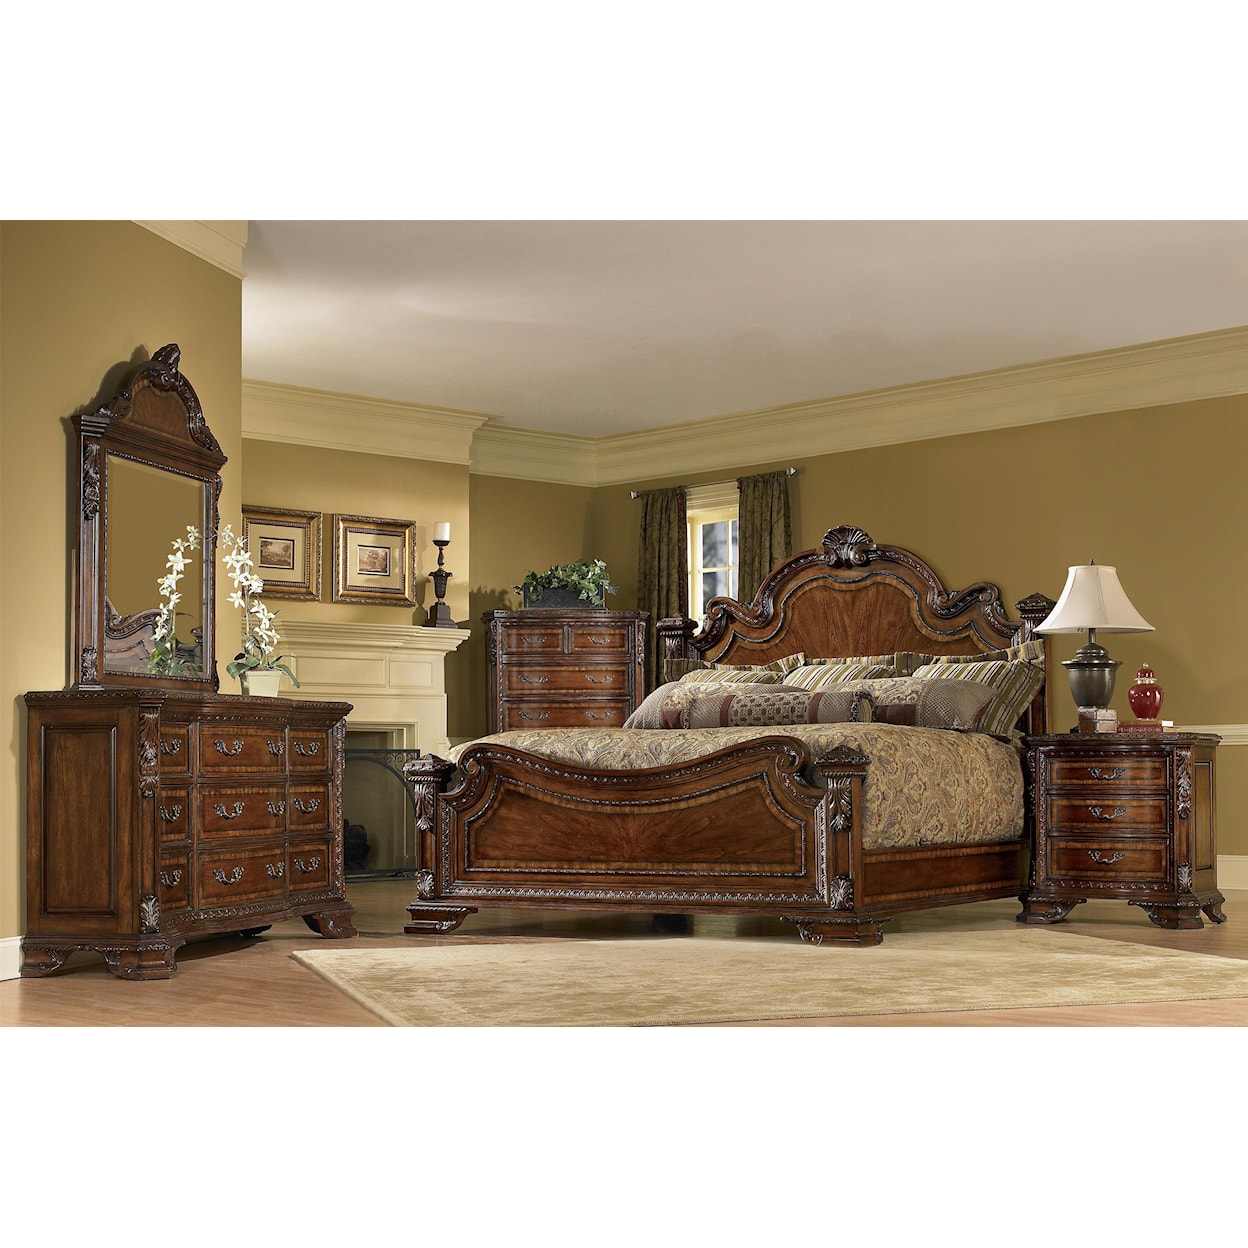 A.R.T. Furniture Inc Annabelle King Bedroom Group